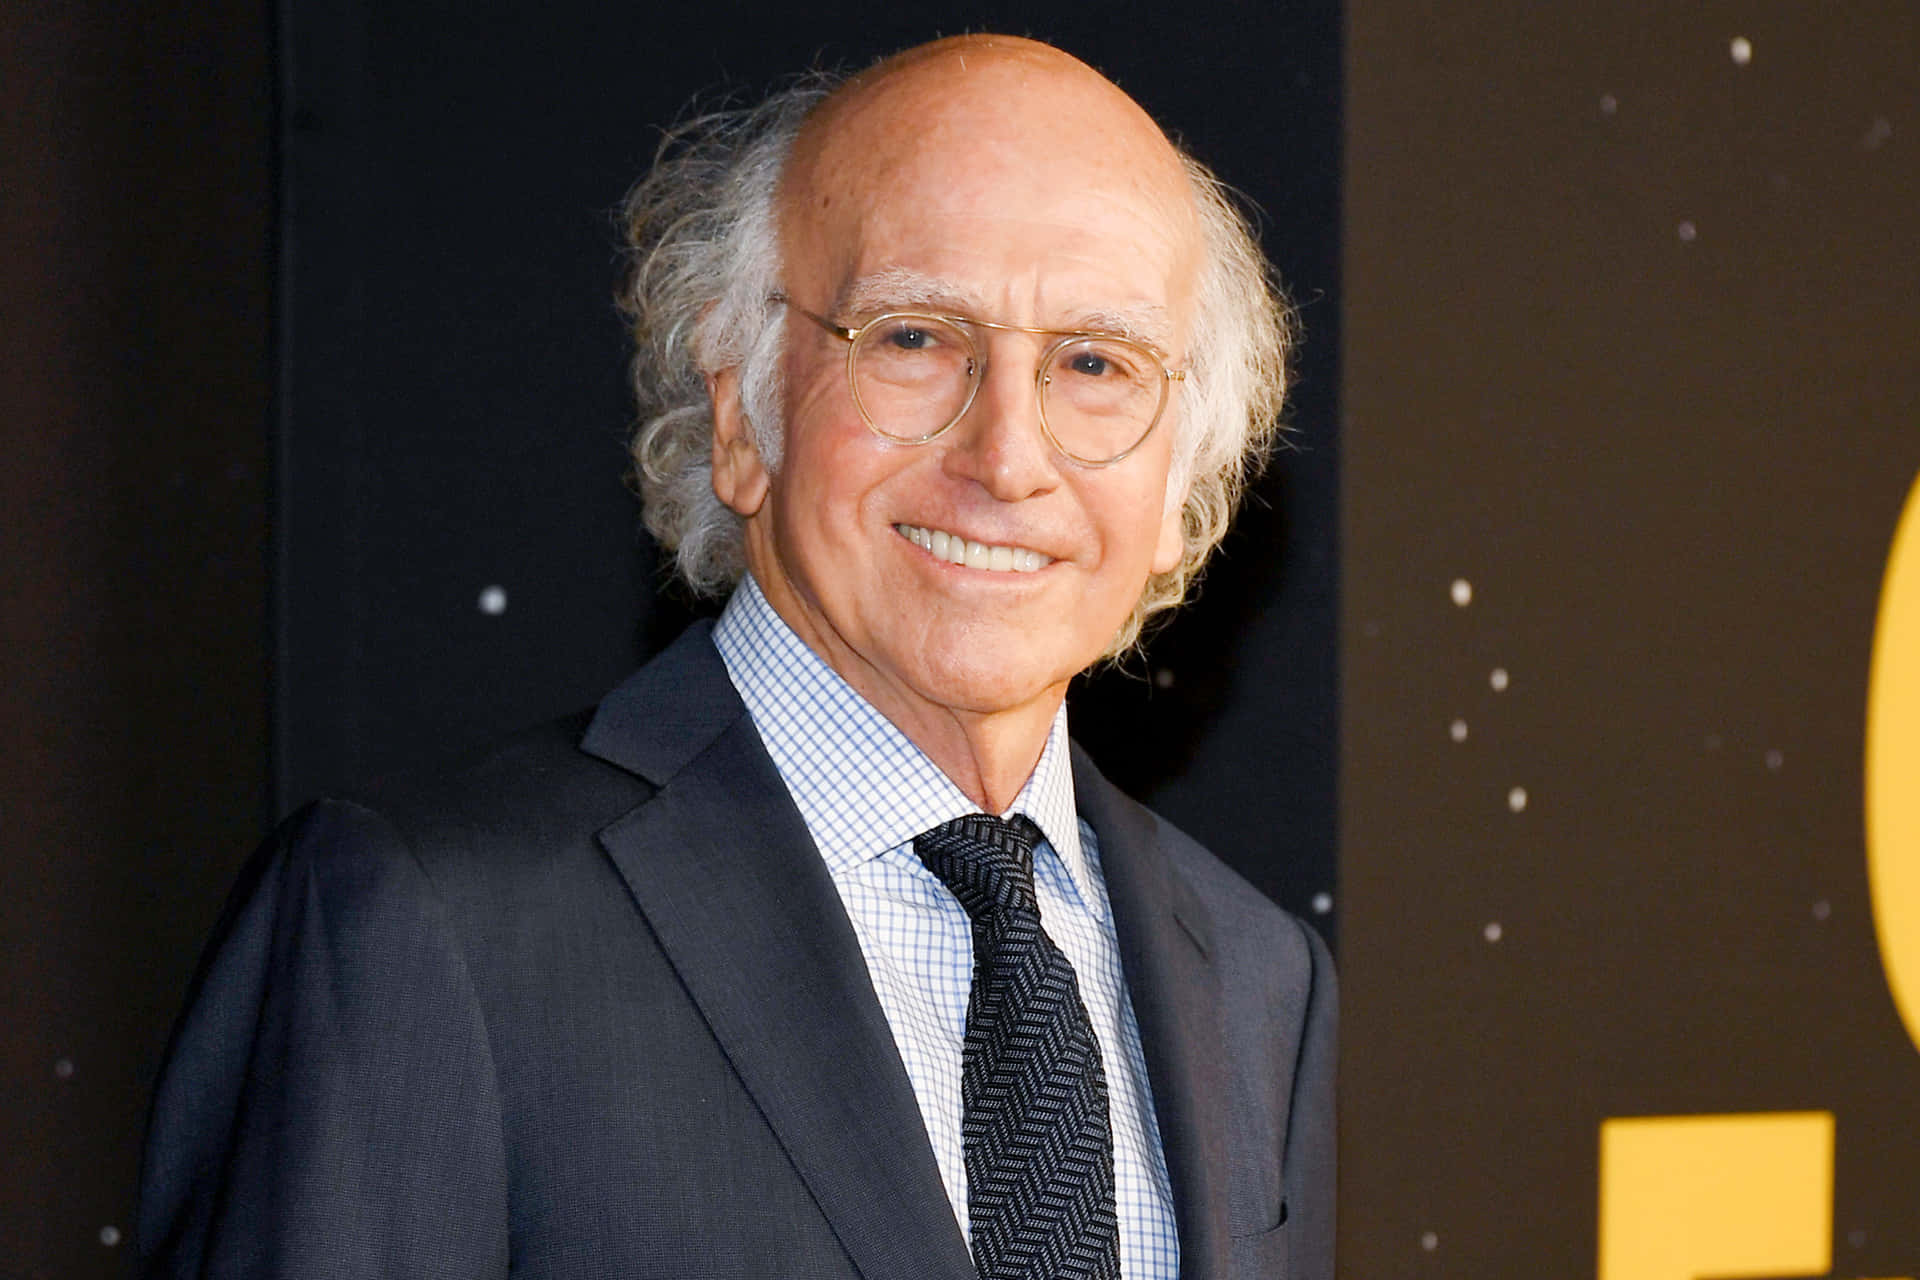 Larry David, creator of 'Seinfeld' and 'Curb Your Enthusiasm' Wallpaper